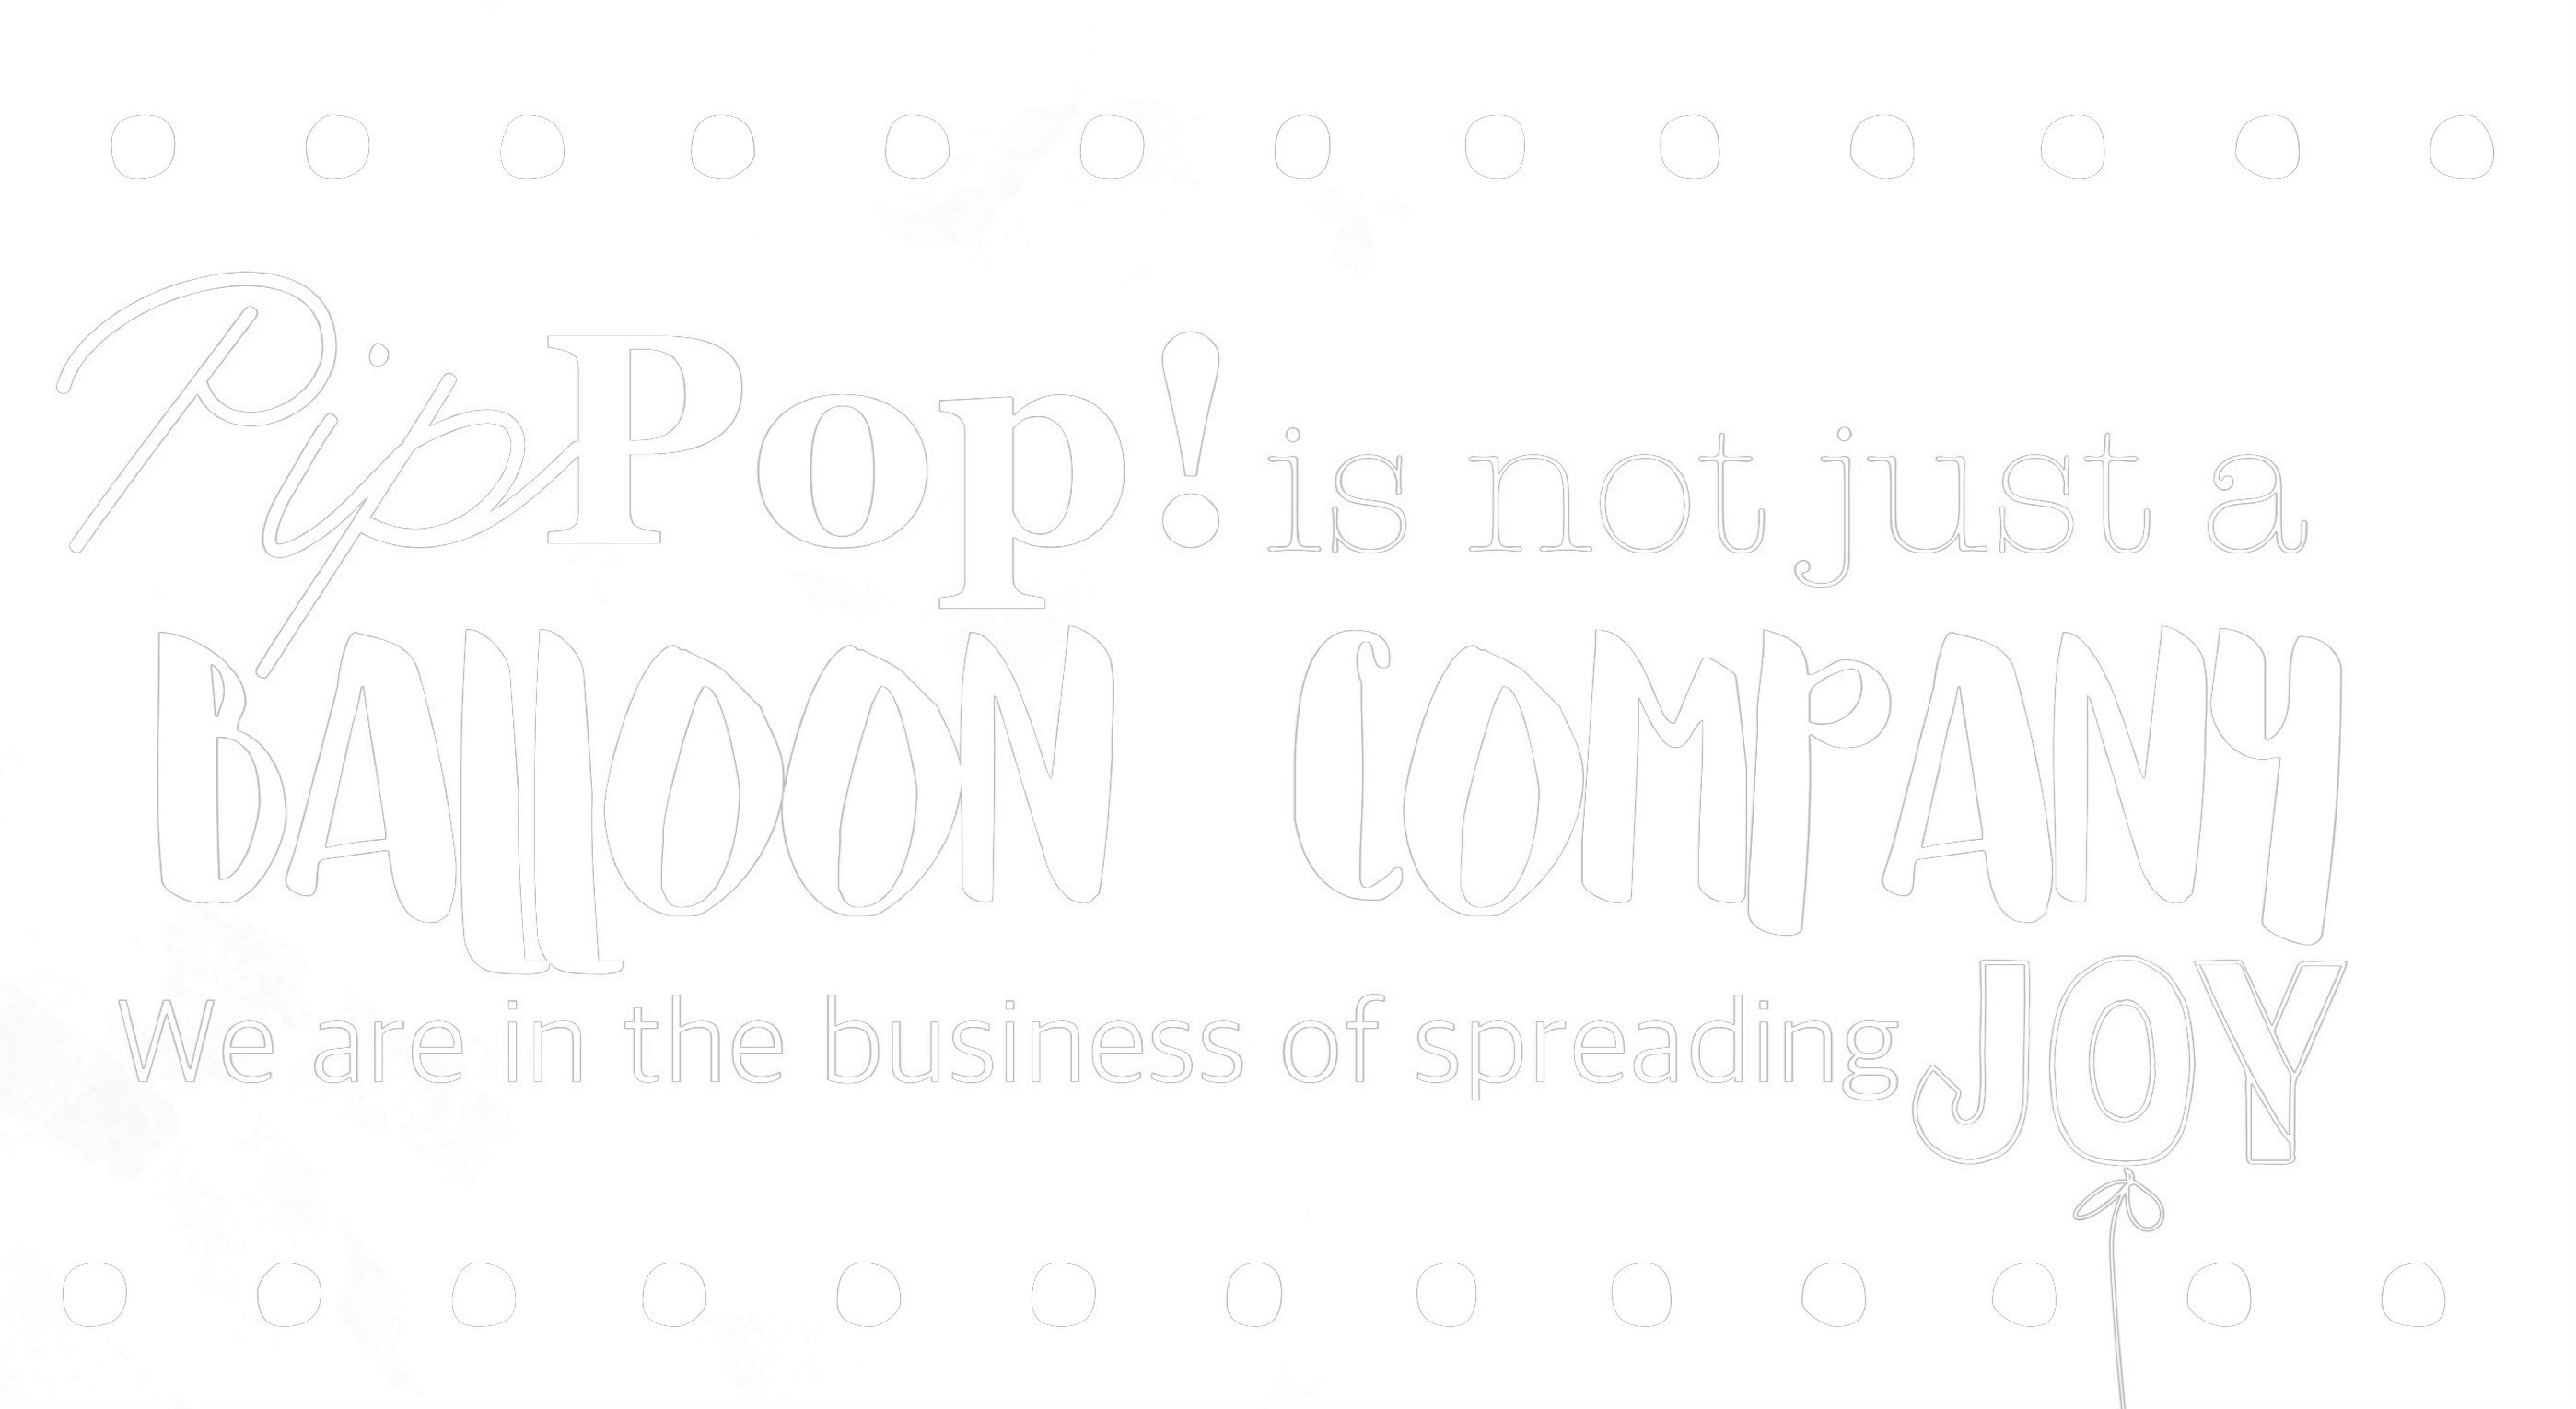 Pip Pop! is not just a balloon company. We are in the business of spreading joy!